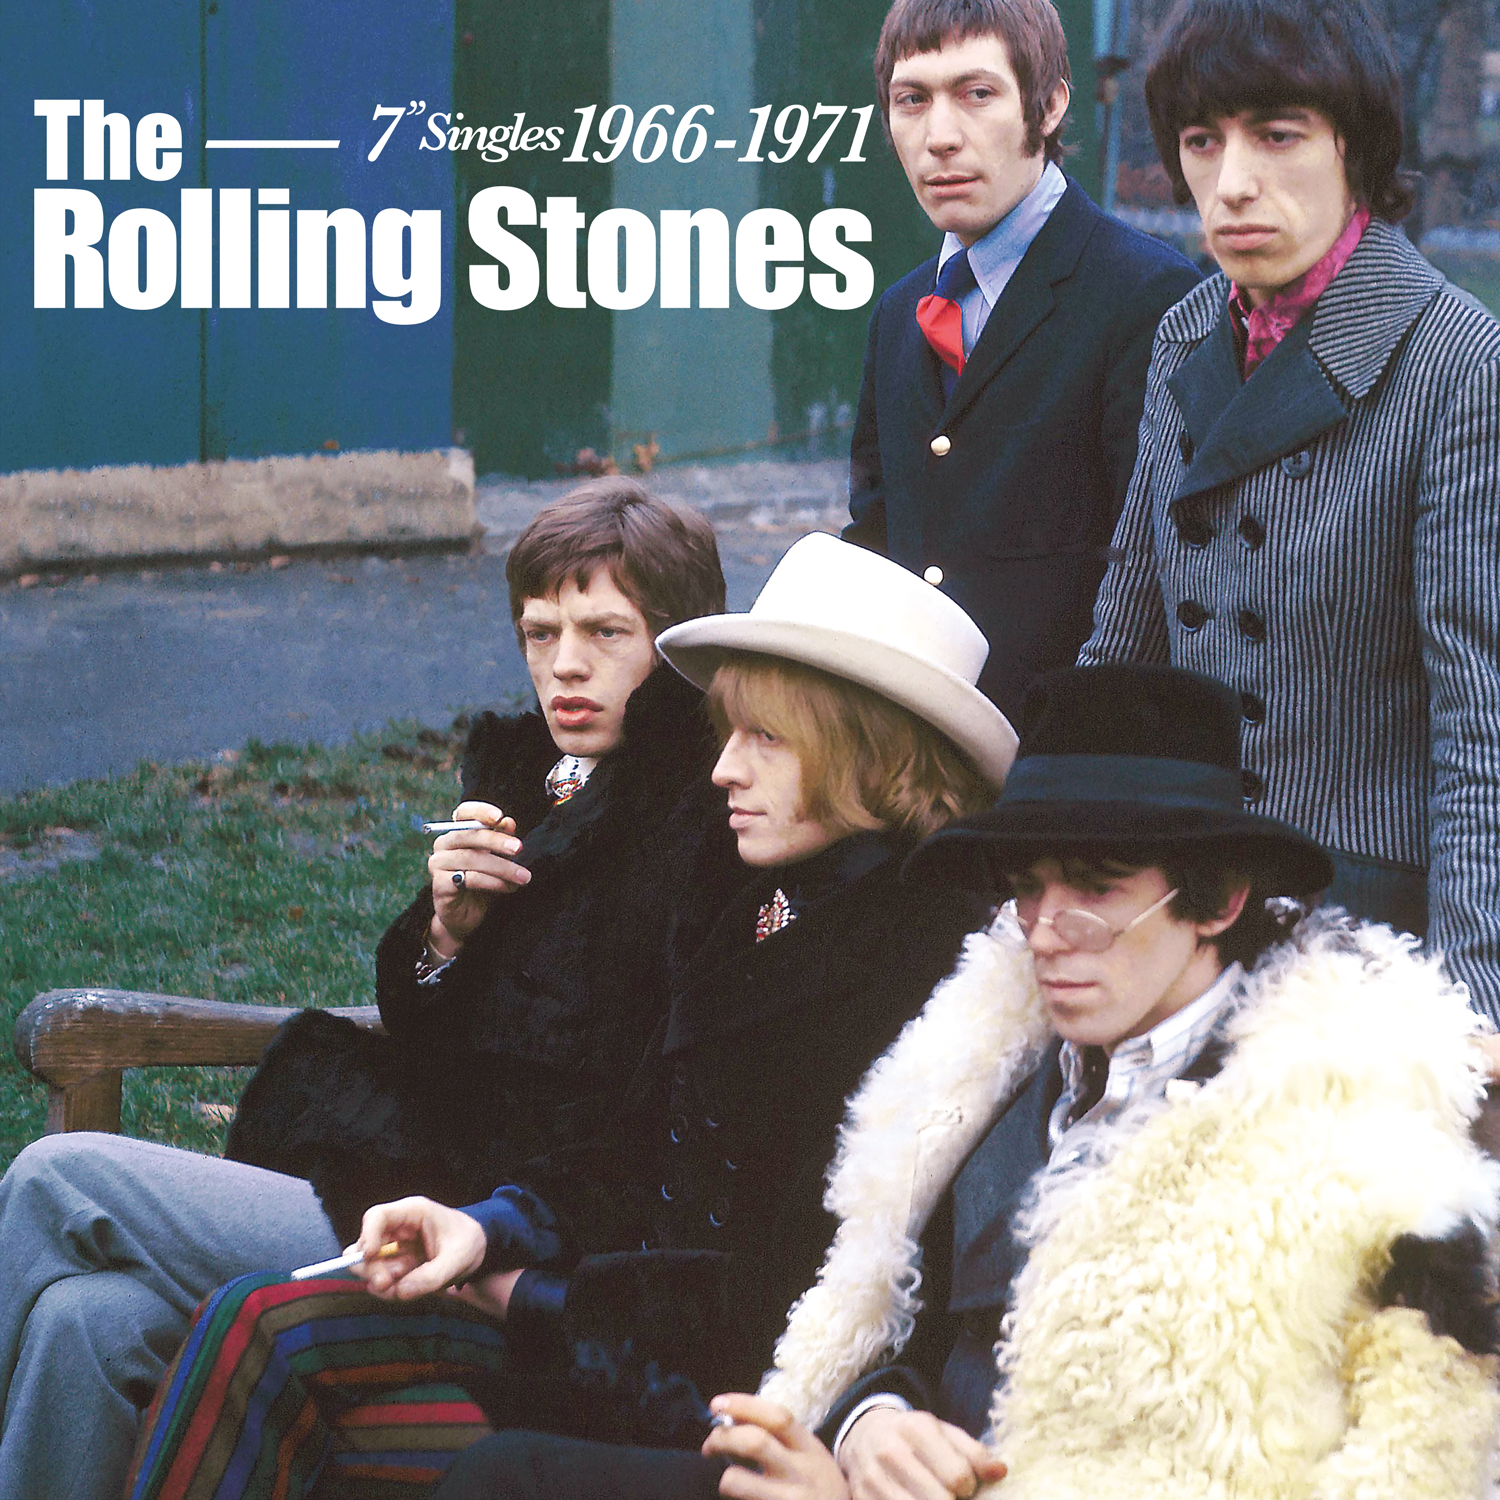 The Rolling Stones - 7" Singles Box Volume Two (1966-1971): Limited 18x7" Box Set